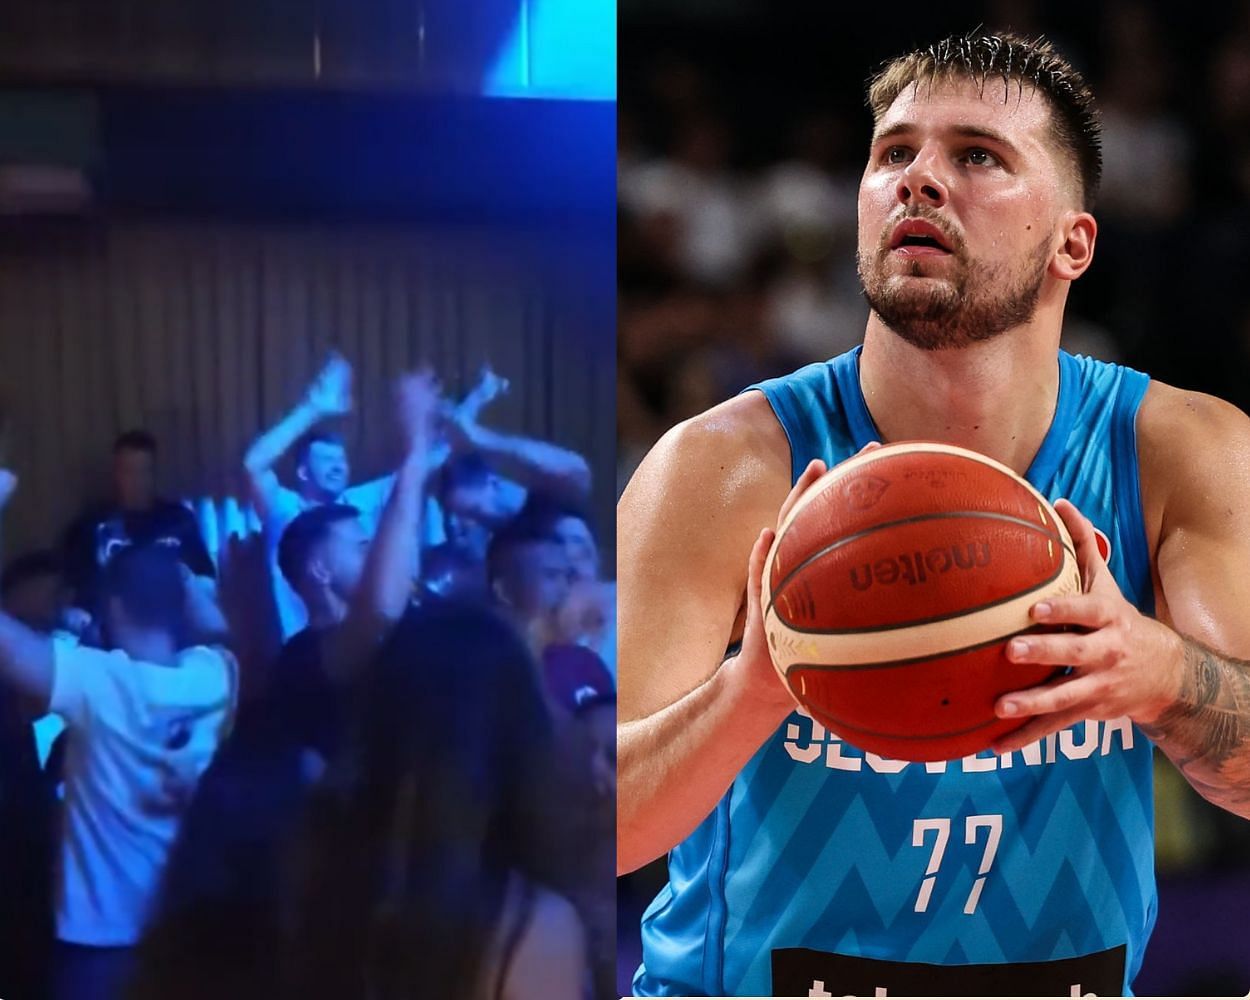 Luka Doncic is back home after the 2023 FIBA World Cup